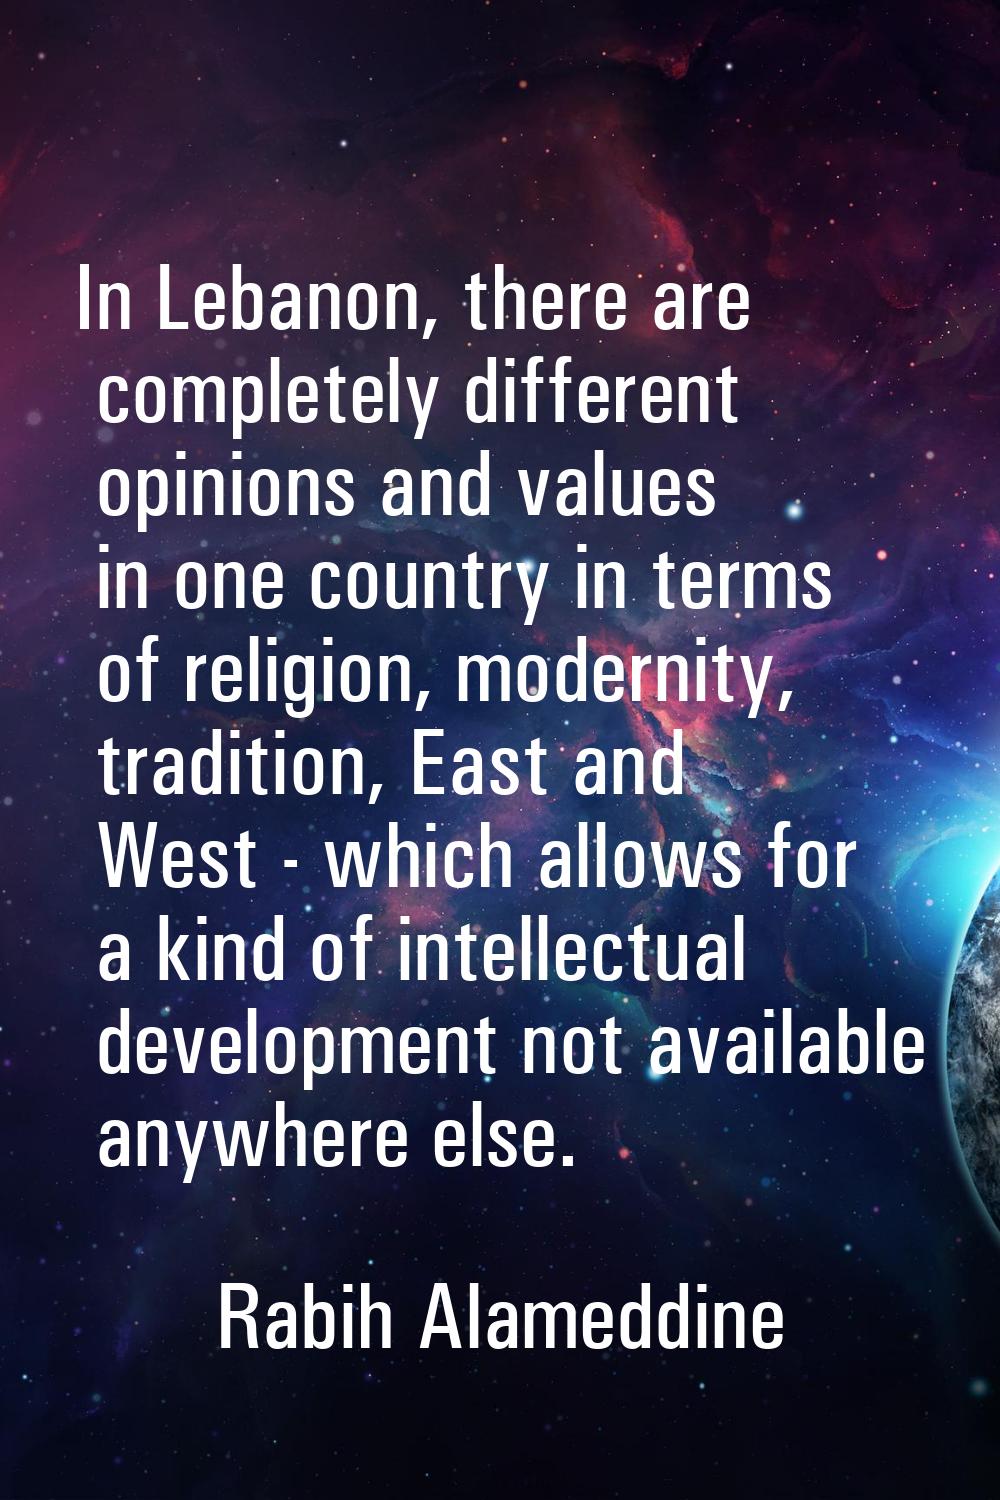 In Lebanon, there are completely different opinions and values in one country in terms of religion,